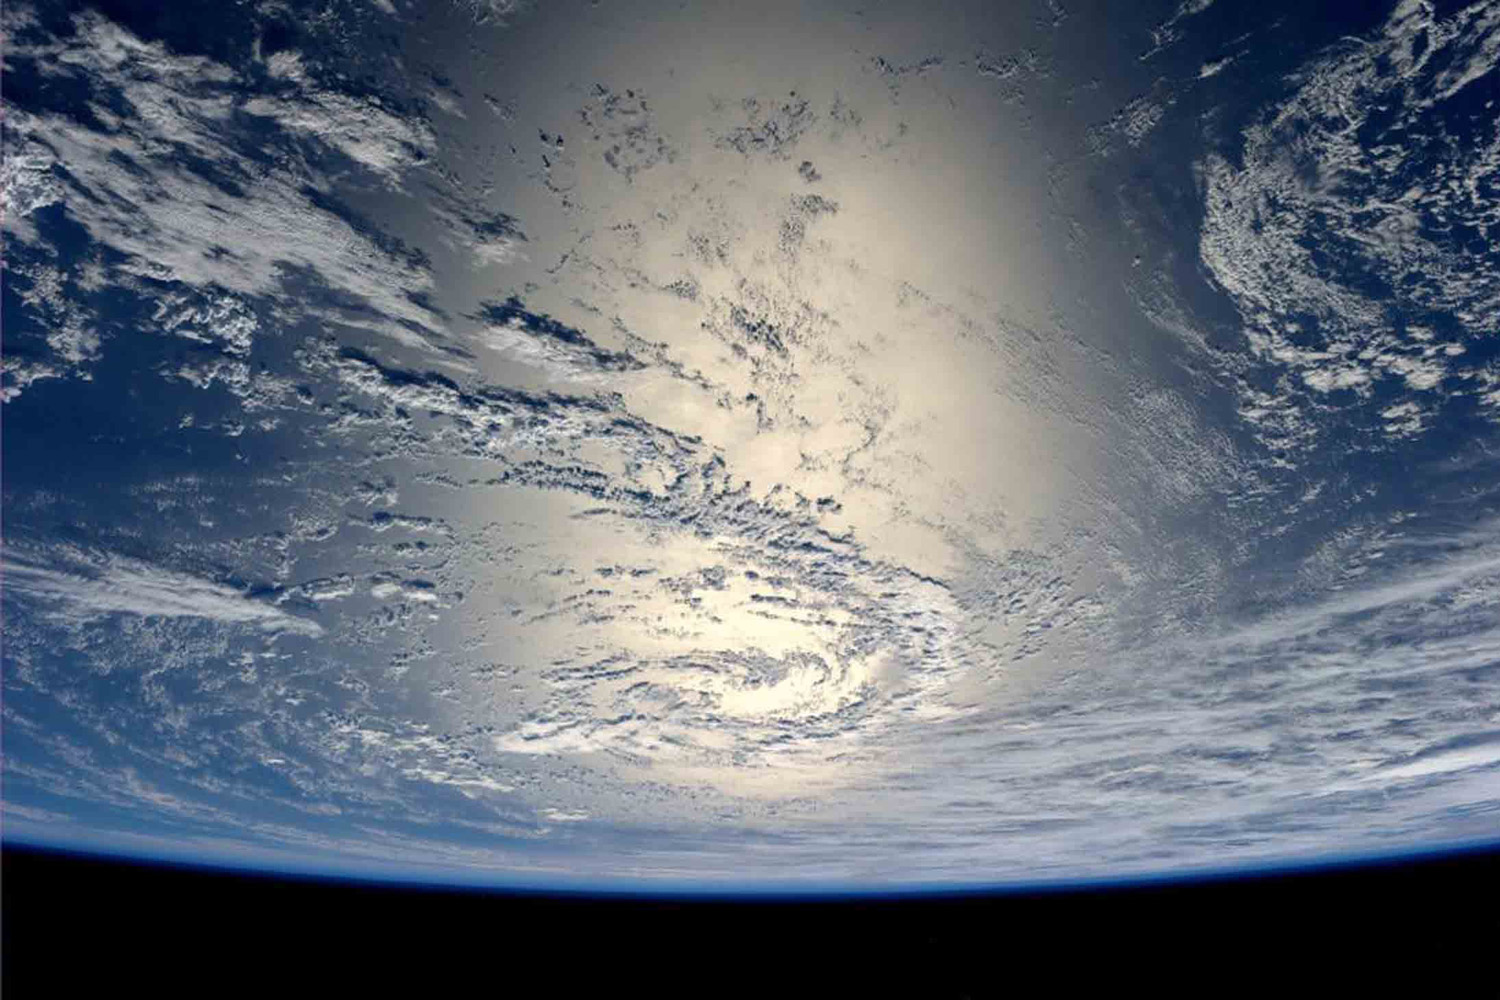 The sun reflects off the water in this picture taken by German astronaut Alexander Gerst from the International Space Station and sent on his Twitter feed on July 17, 2014.